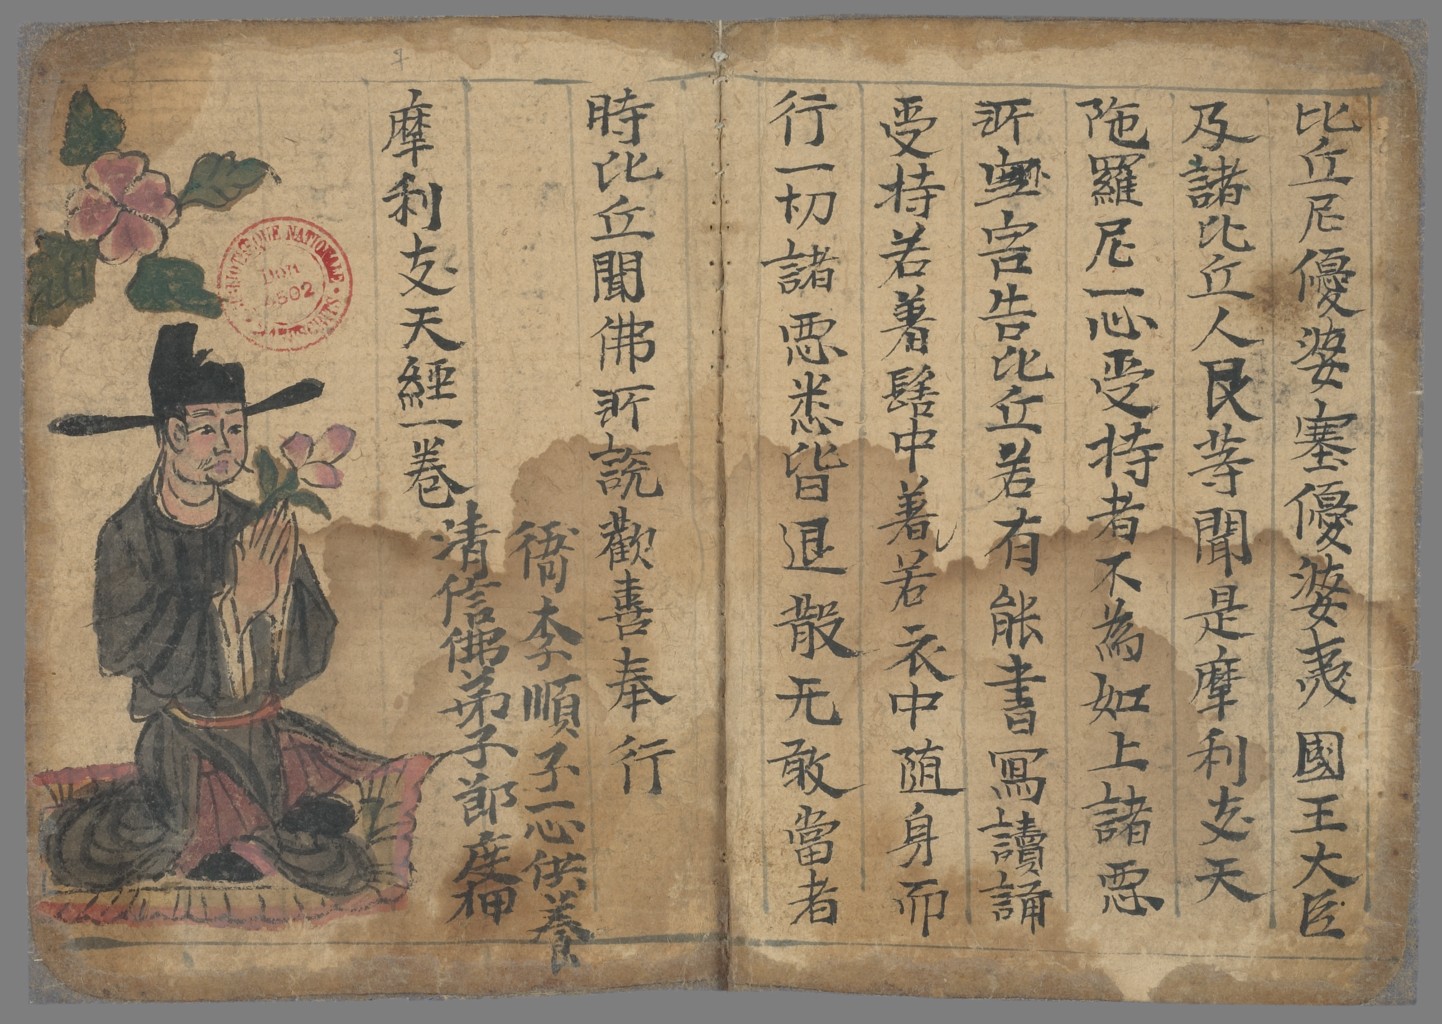 Man kneeling and holding a flower and facing text in Chinese characters.